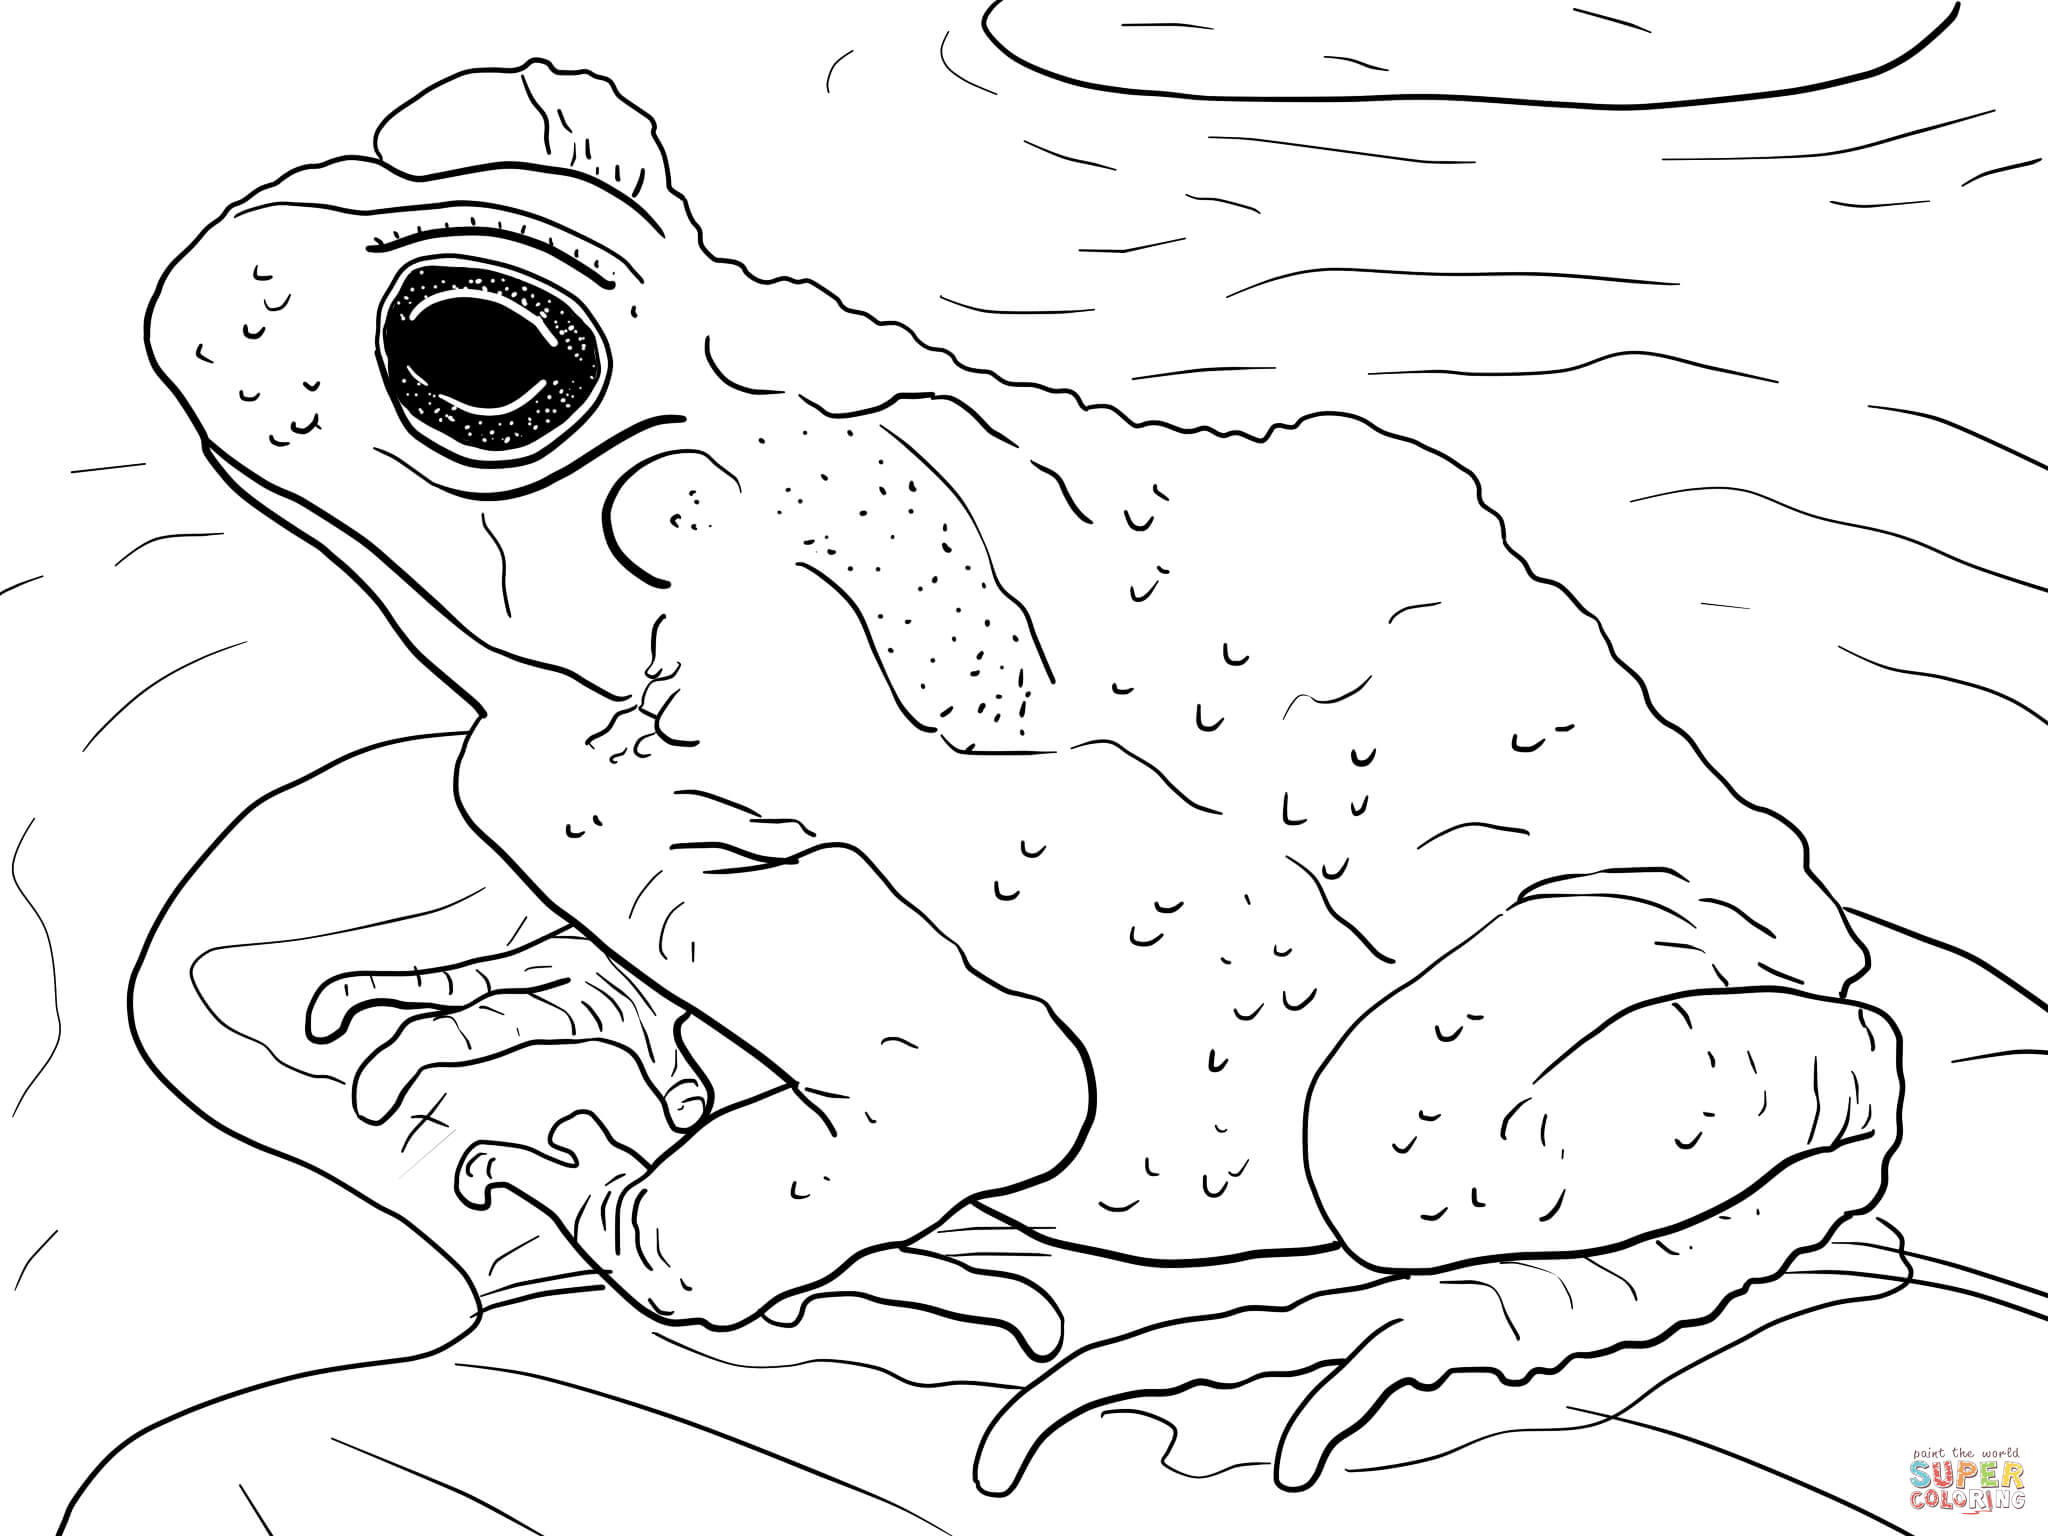 Cane Toad coloring #9, Download drawings